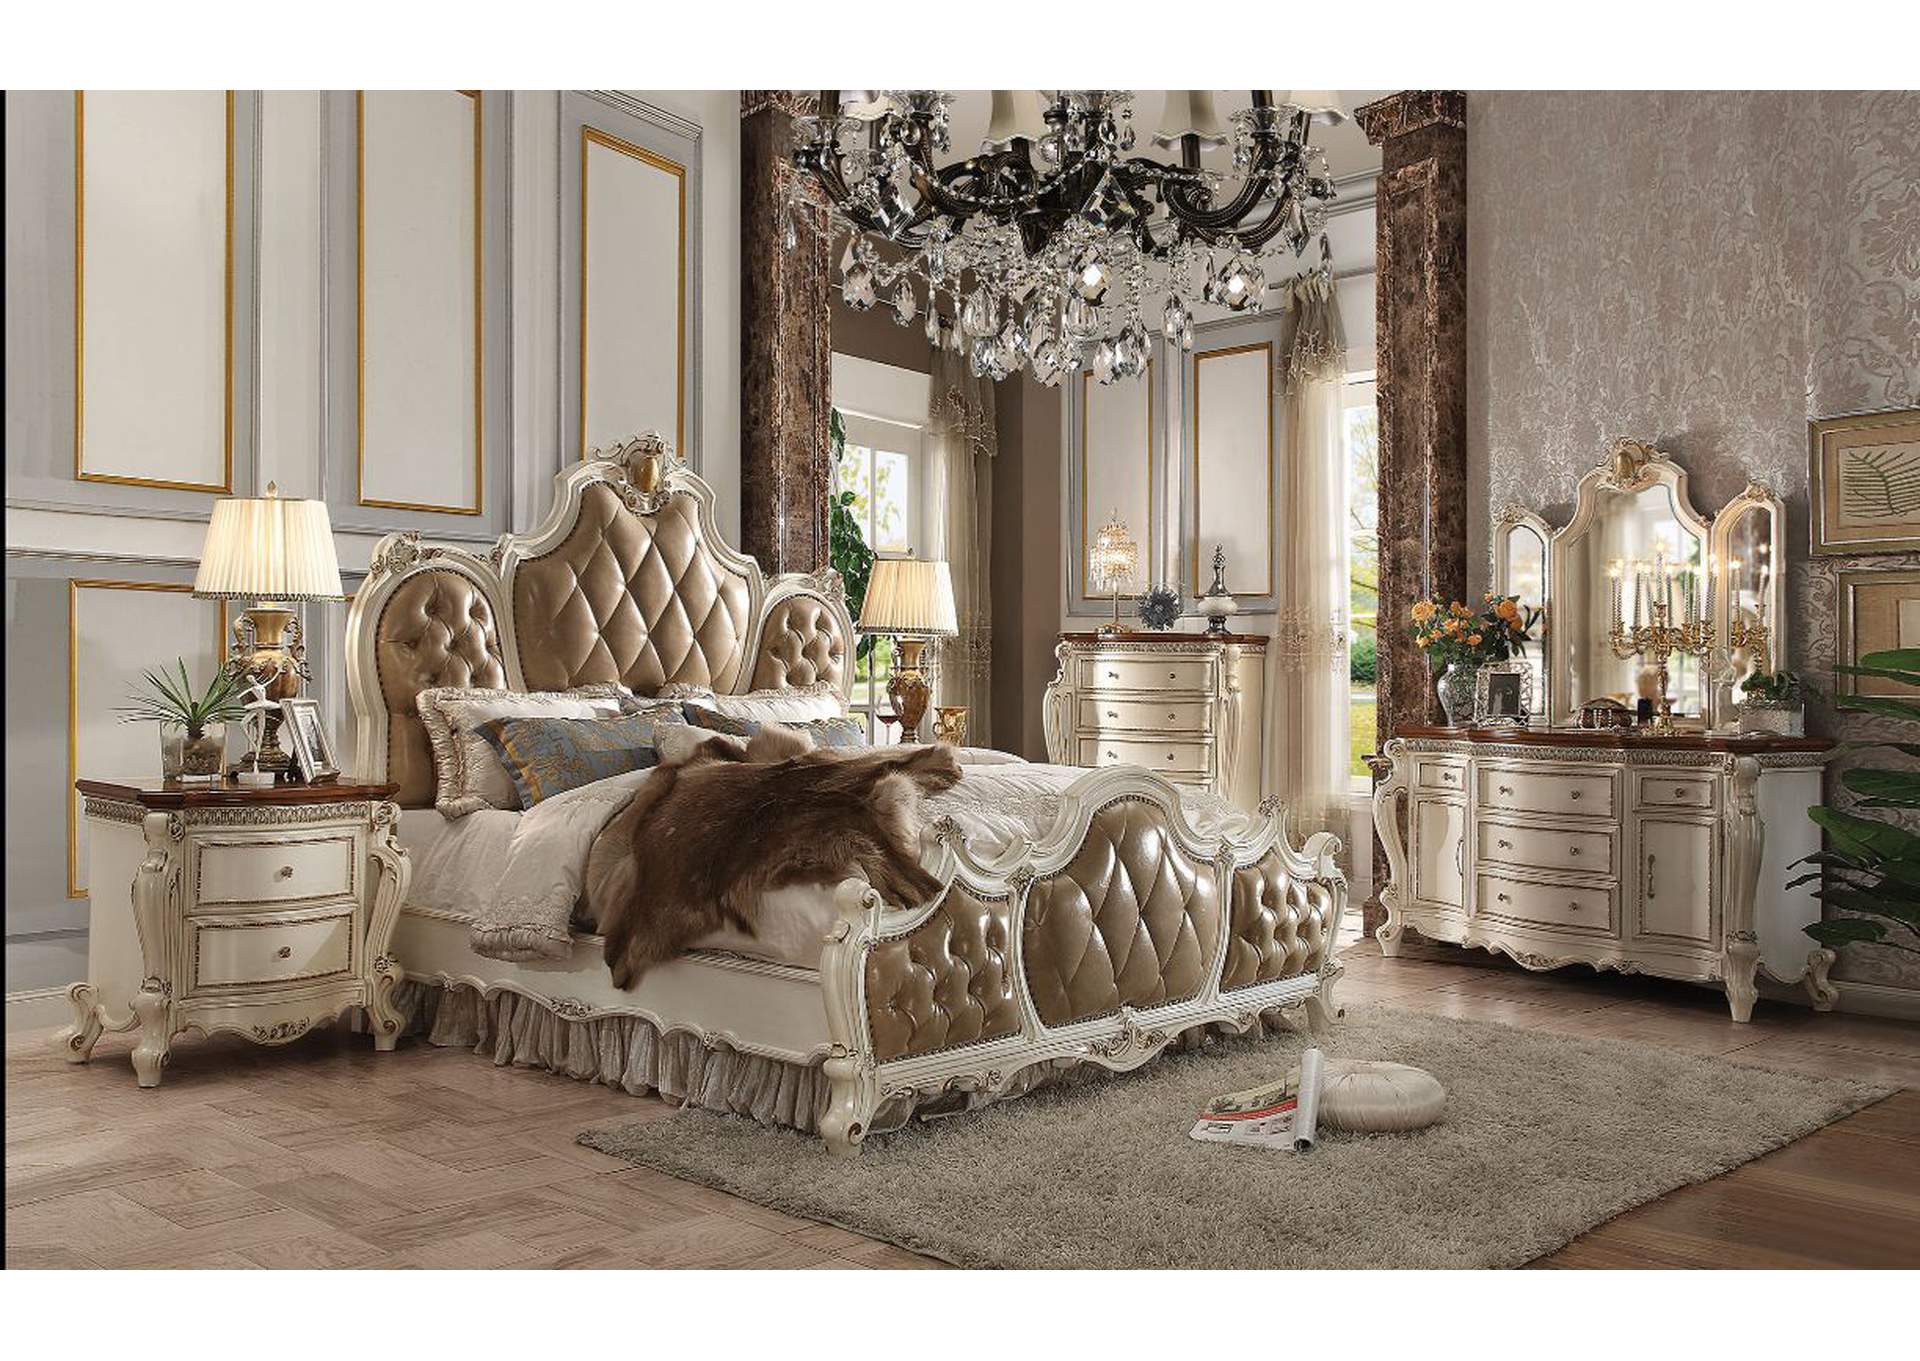 Picardy Butterscotch PU & Antique Pearl Queen Bed,Acme